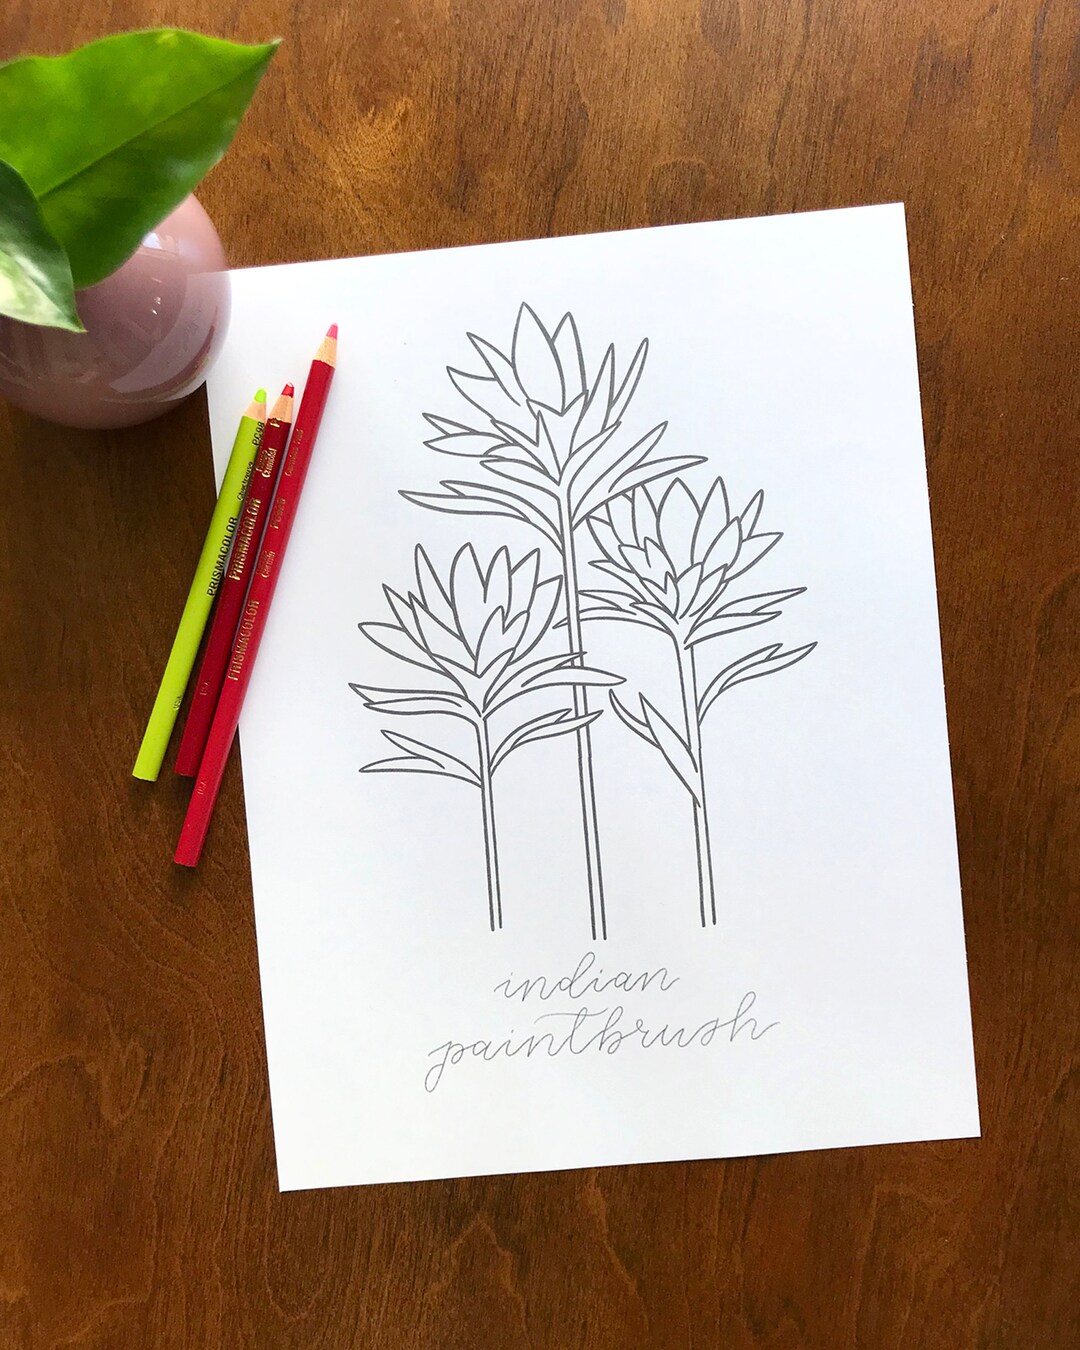 Indian paintbrush wildflower coloring page fun coloring activity printable flower coloring pages floral coloring sheets